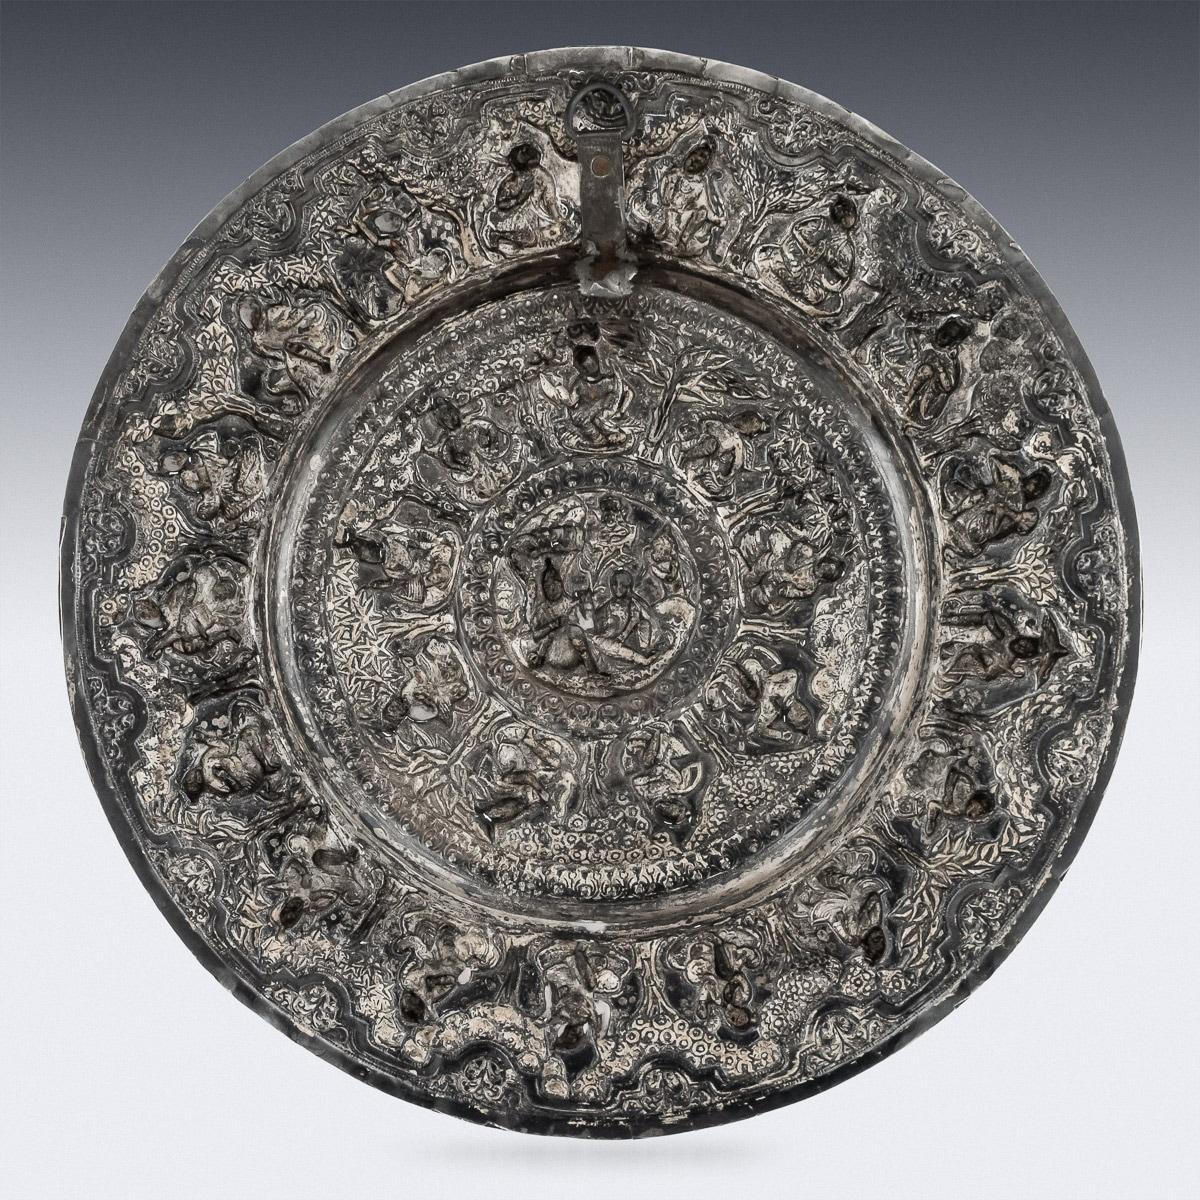 Antique late-19th century Indian solid silver dish, of impressive size, highly-decorative, embossed with various figures of deities, surrounded with bands of scrolling floral foliage, plain boarder and large bead boarder. The dishes distinctive